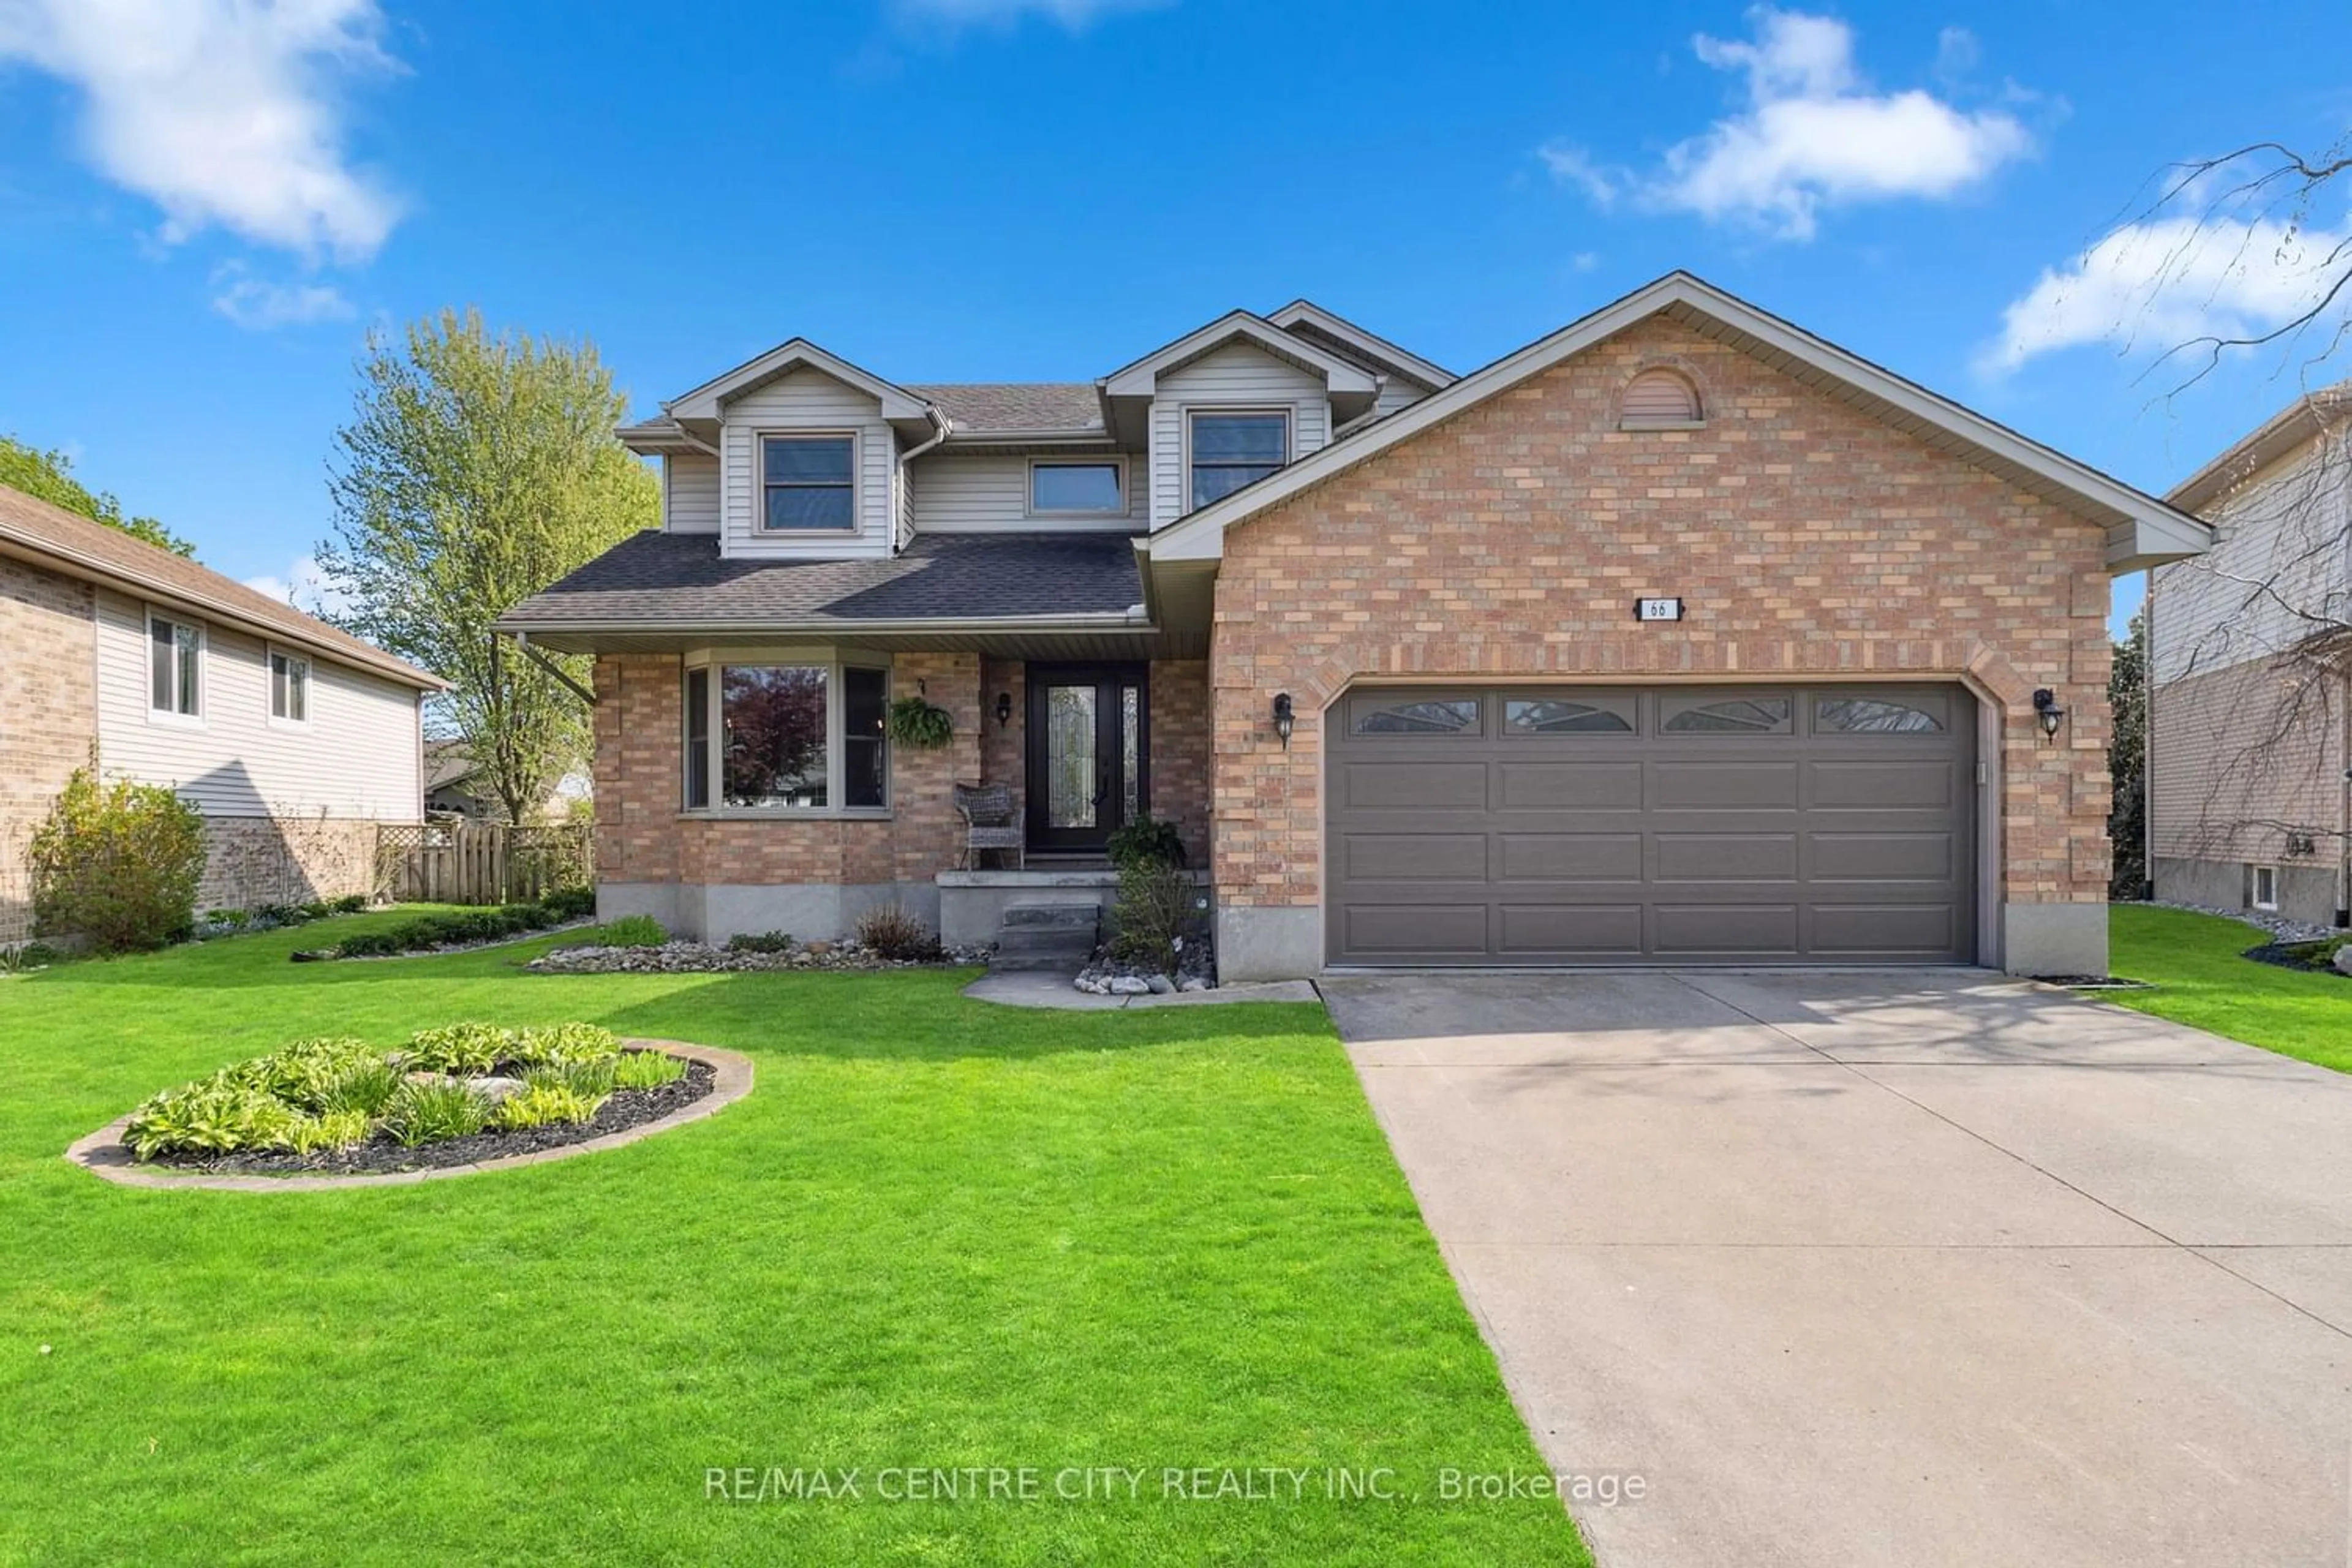 Home with brick exterior material for 66 Parkview Cres, Strathroy-Caradoc Ontario N7G 4B1